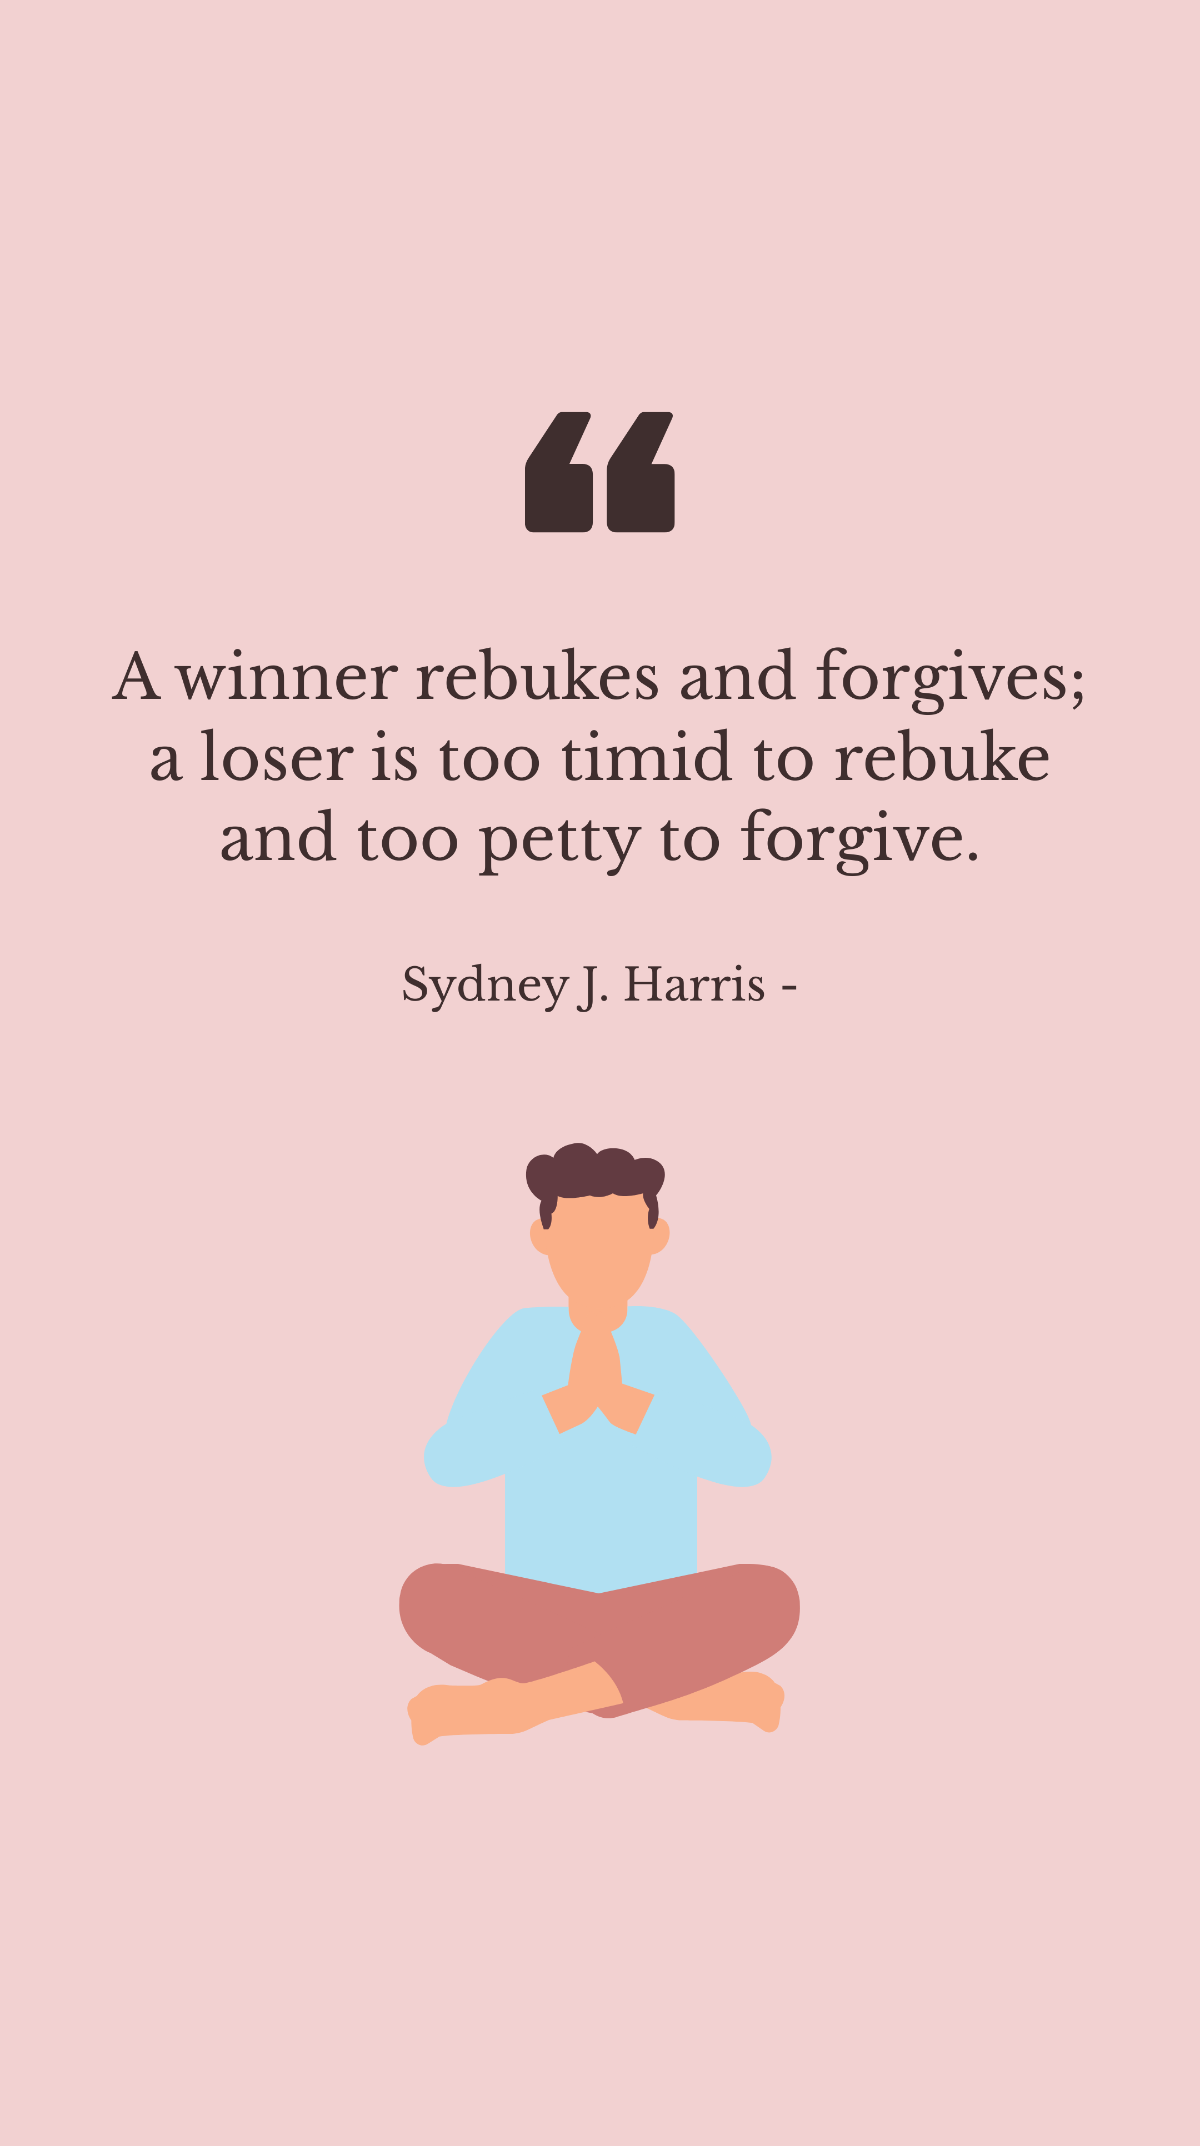 Free Sydney J. Harris - A winner rebukes and forgives; a loser is too timid to rebuke and too petty to forgive. Template